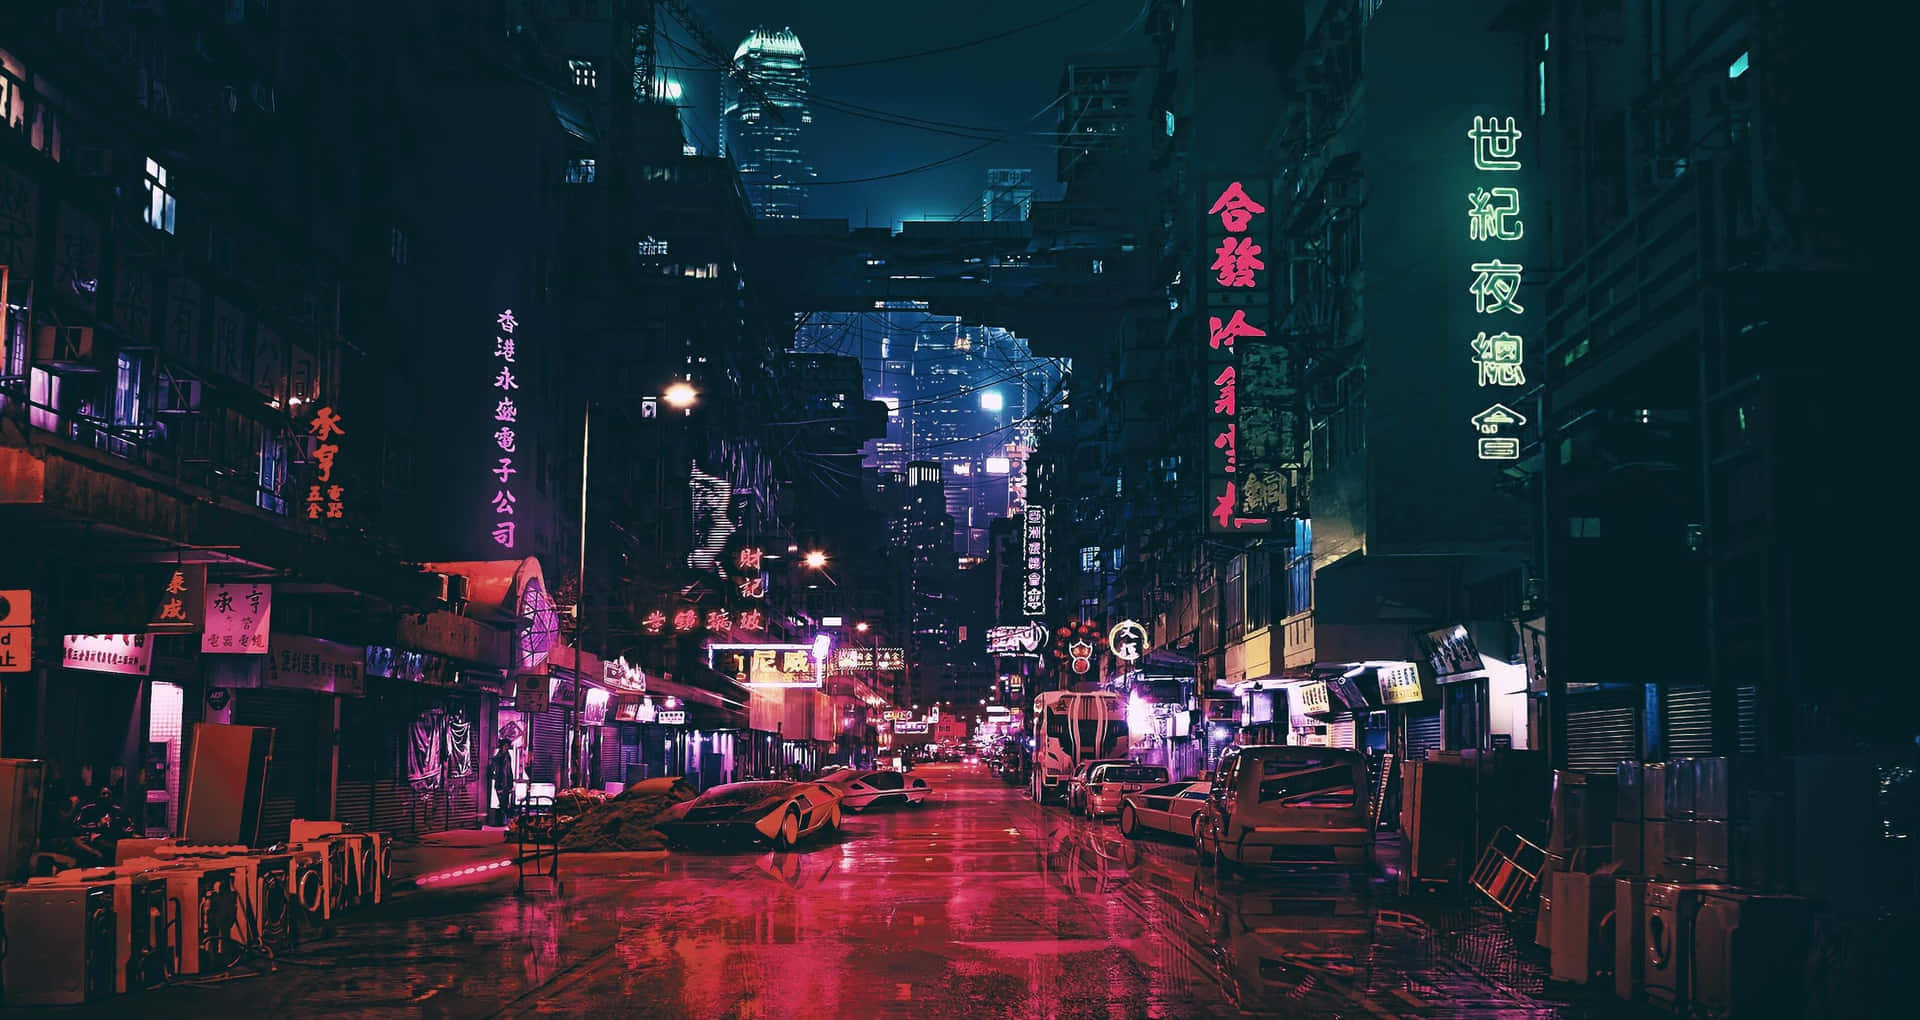 A City Street With Neon Lights And Neon Signs